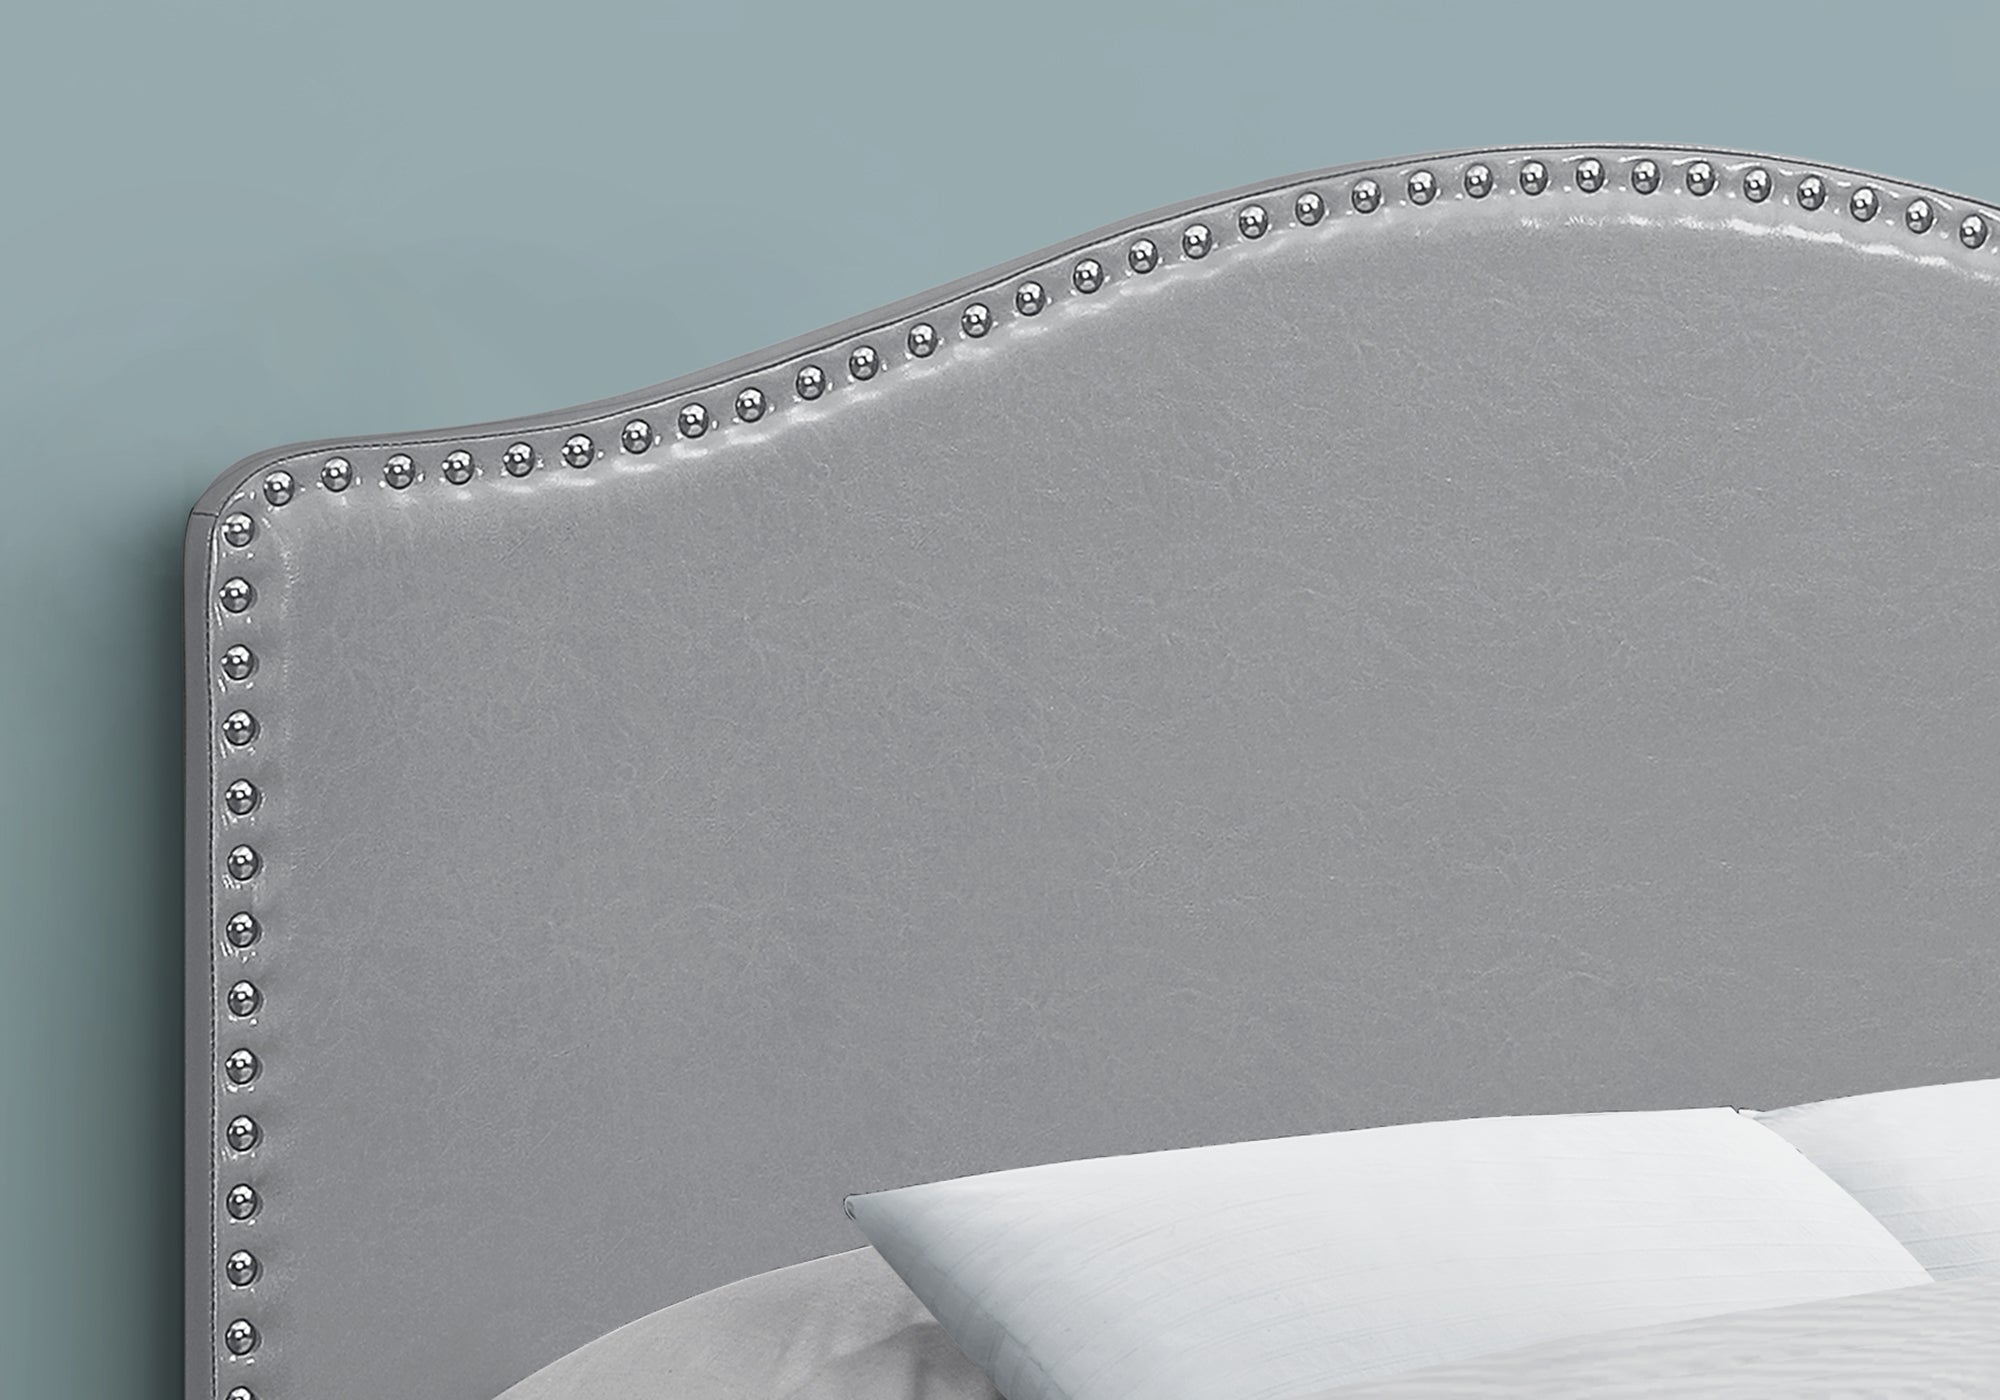 Bed - Full Size / Grey Leather-Look Headboard Only